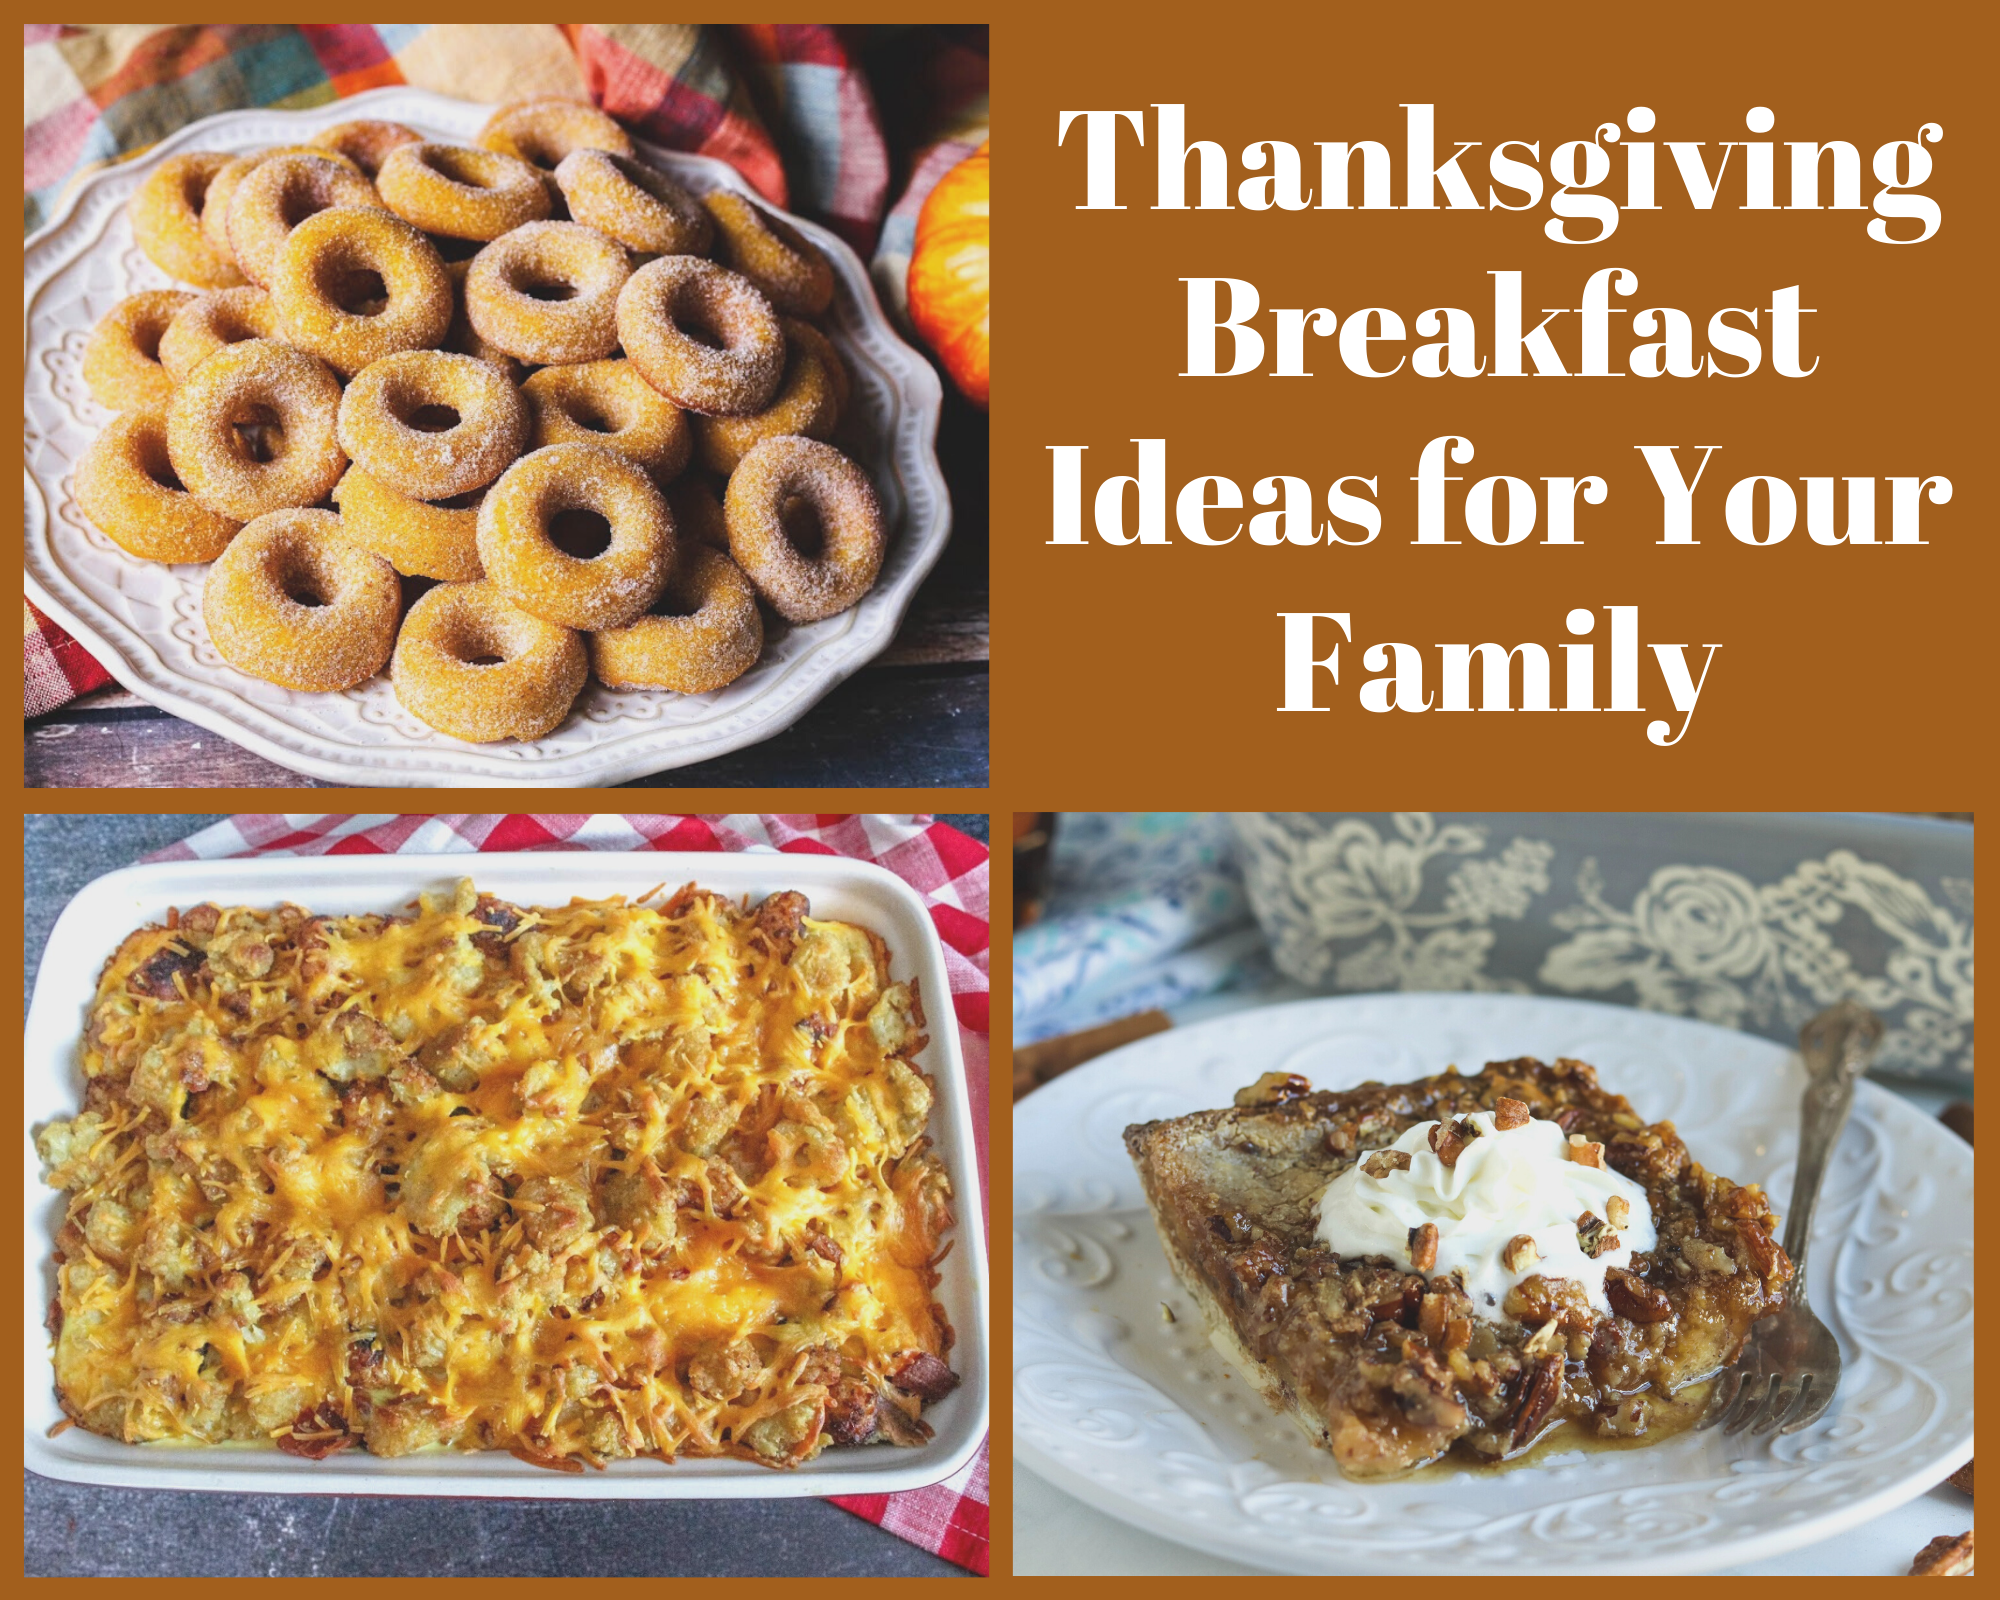 Thanksgiving breakfast ideas donuts, casseroles and French toast